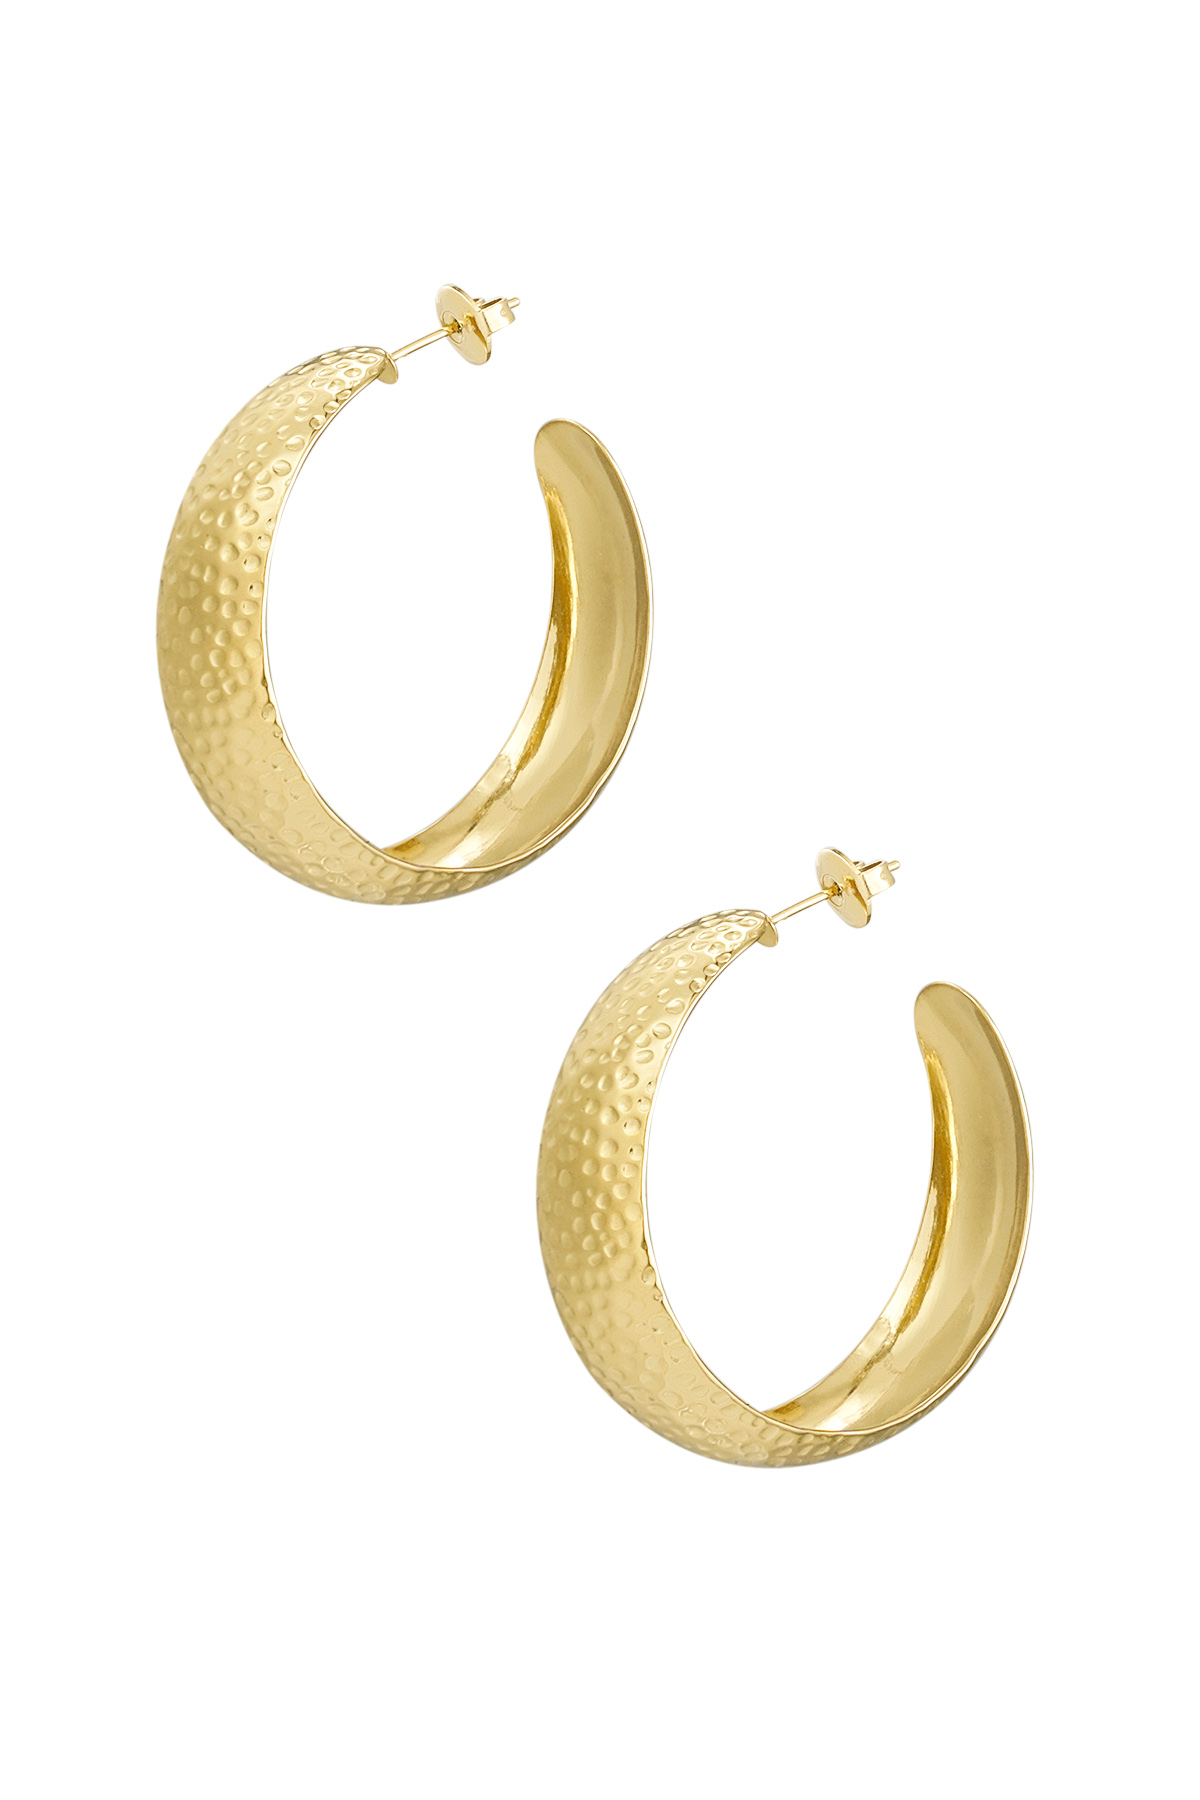 Earrings bubbly structure - gold h5 